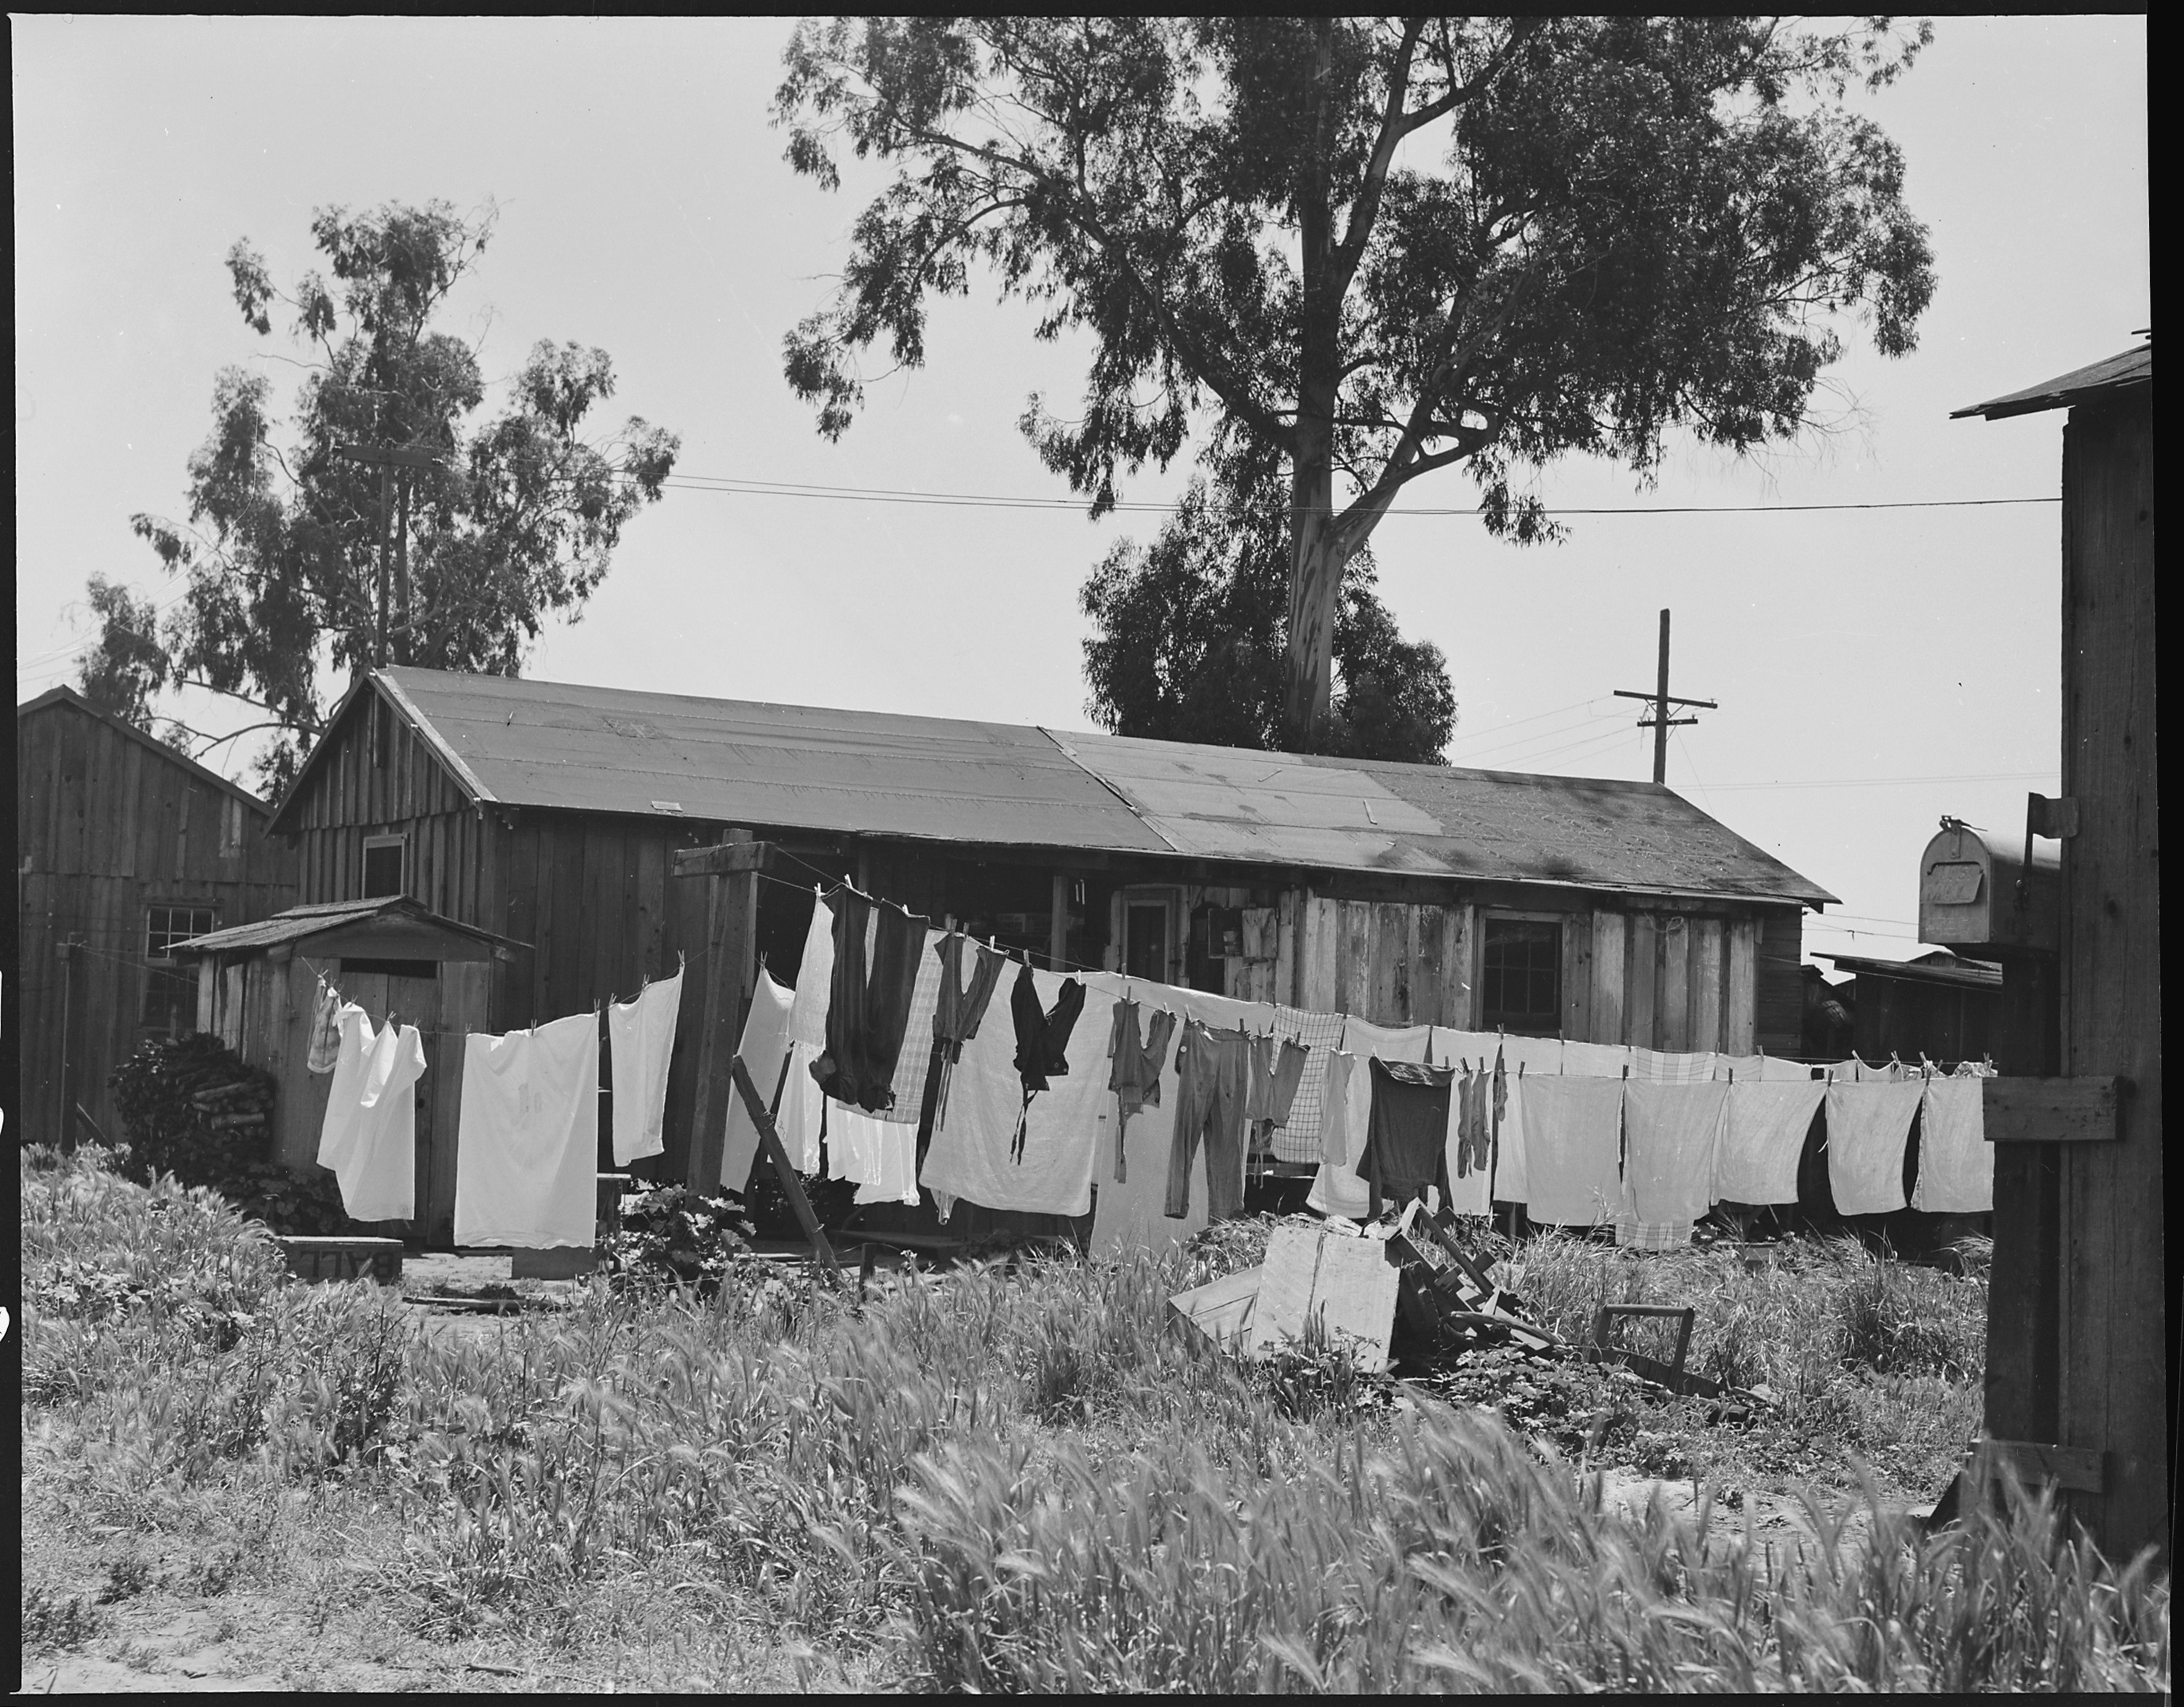 San Lorenzo, California. Washday 48 hours before evacuation of persons of Japanese ancestry from th . . . - NARA - 537544